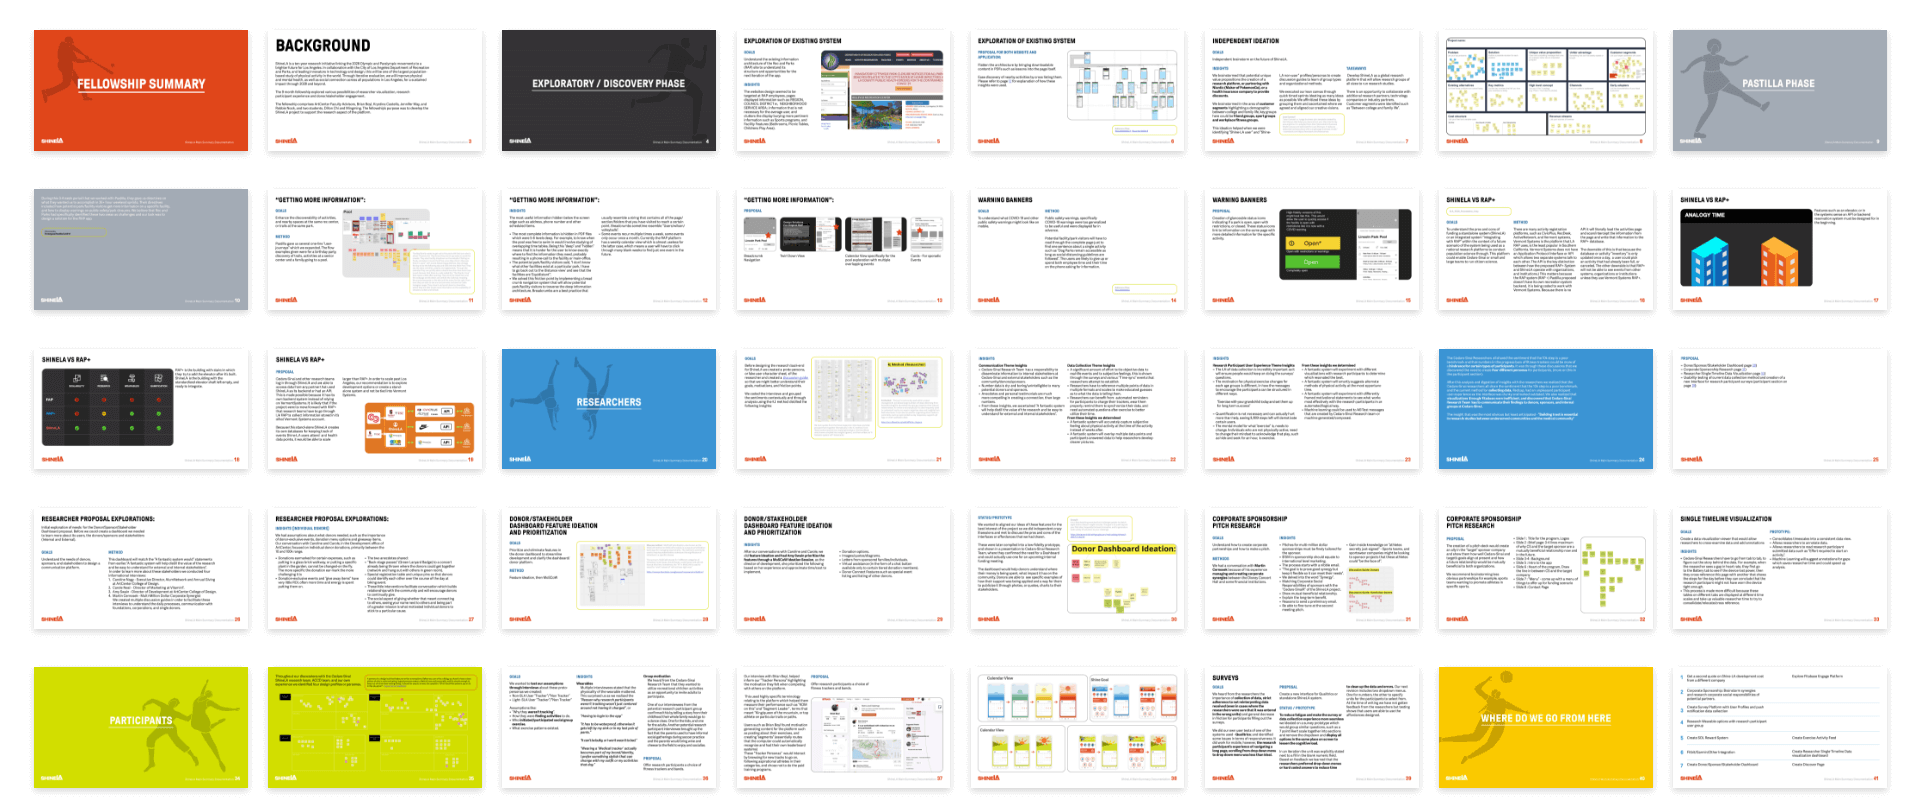 Screenshot of a grid of slides from the final presentation